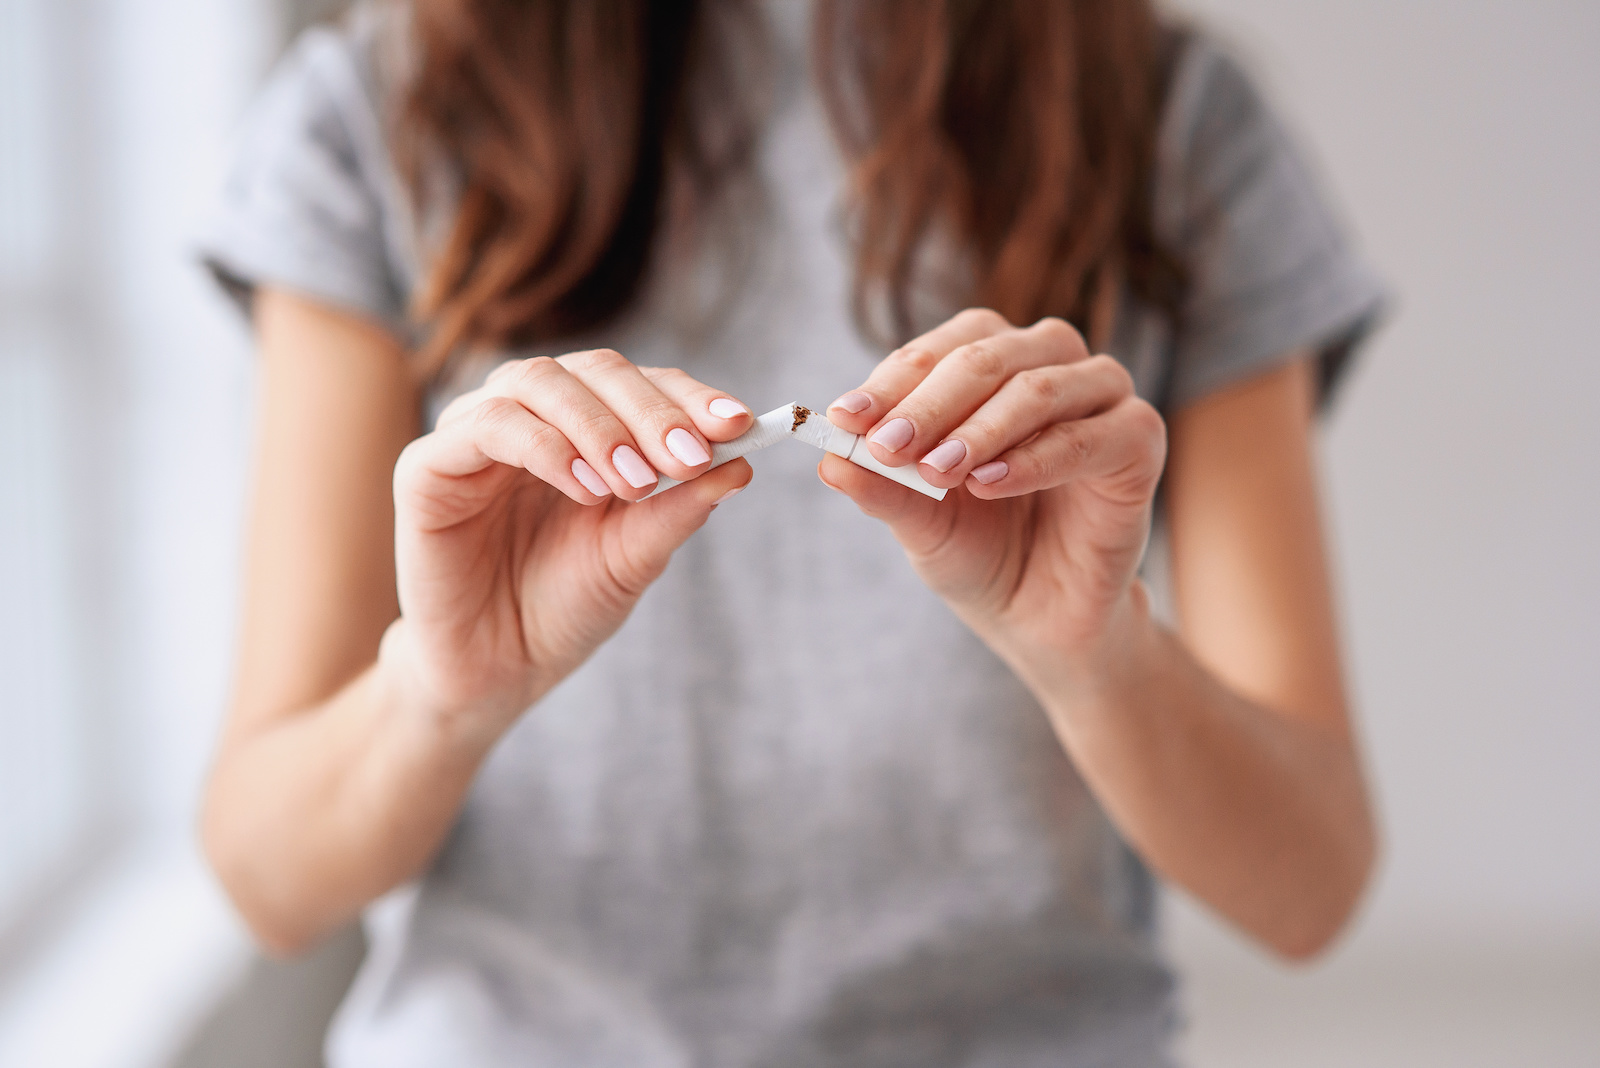 Nicotine Detox: Withdrawal Symptoms, Timeline, and How to Safely Detox